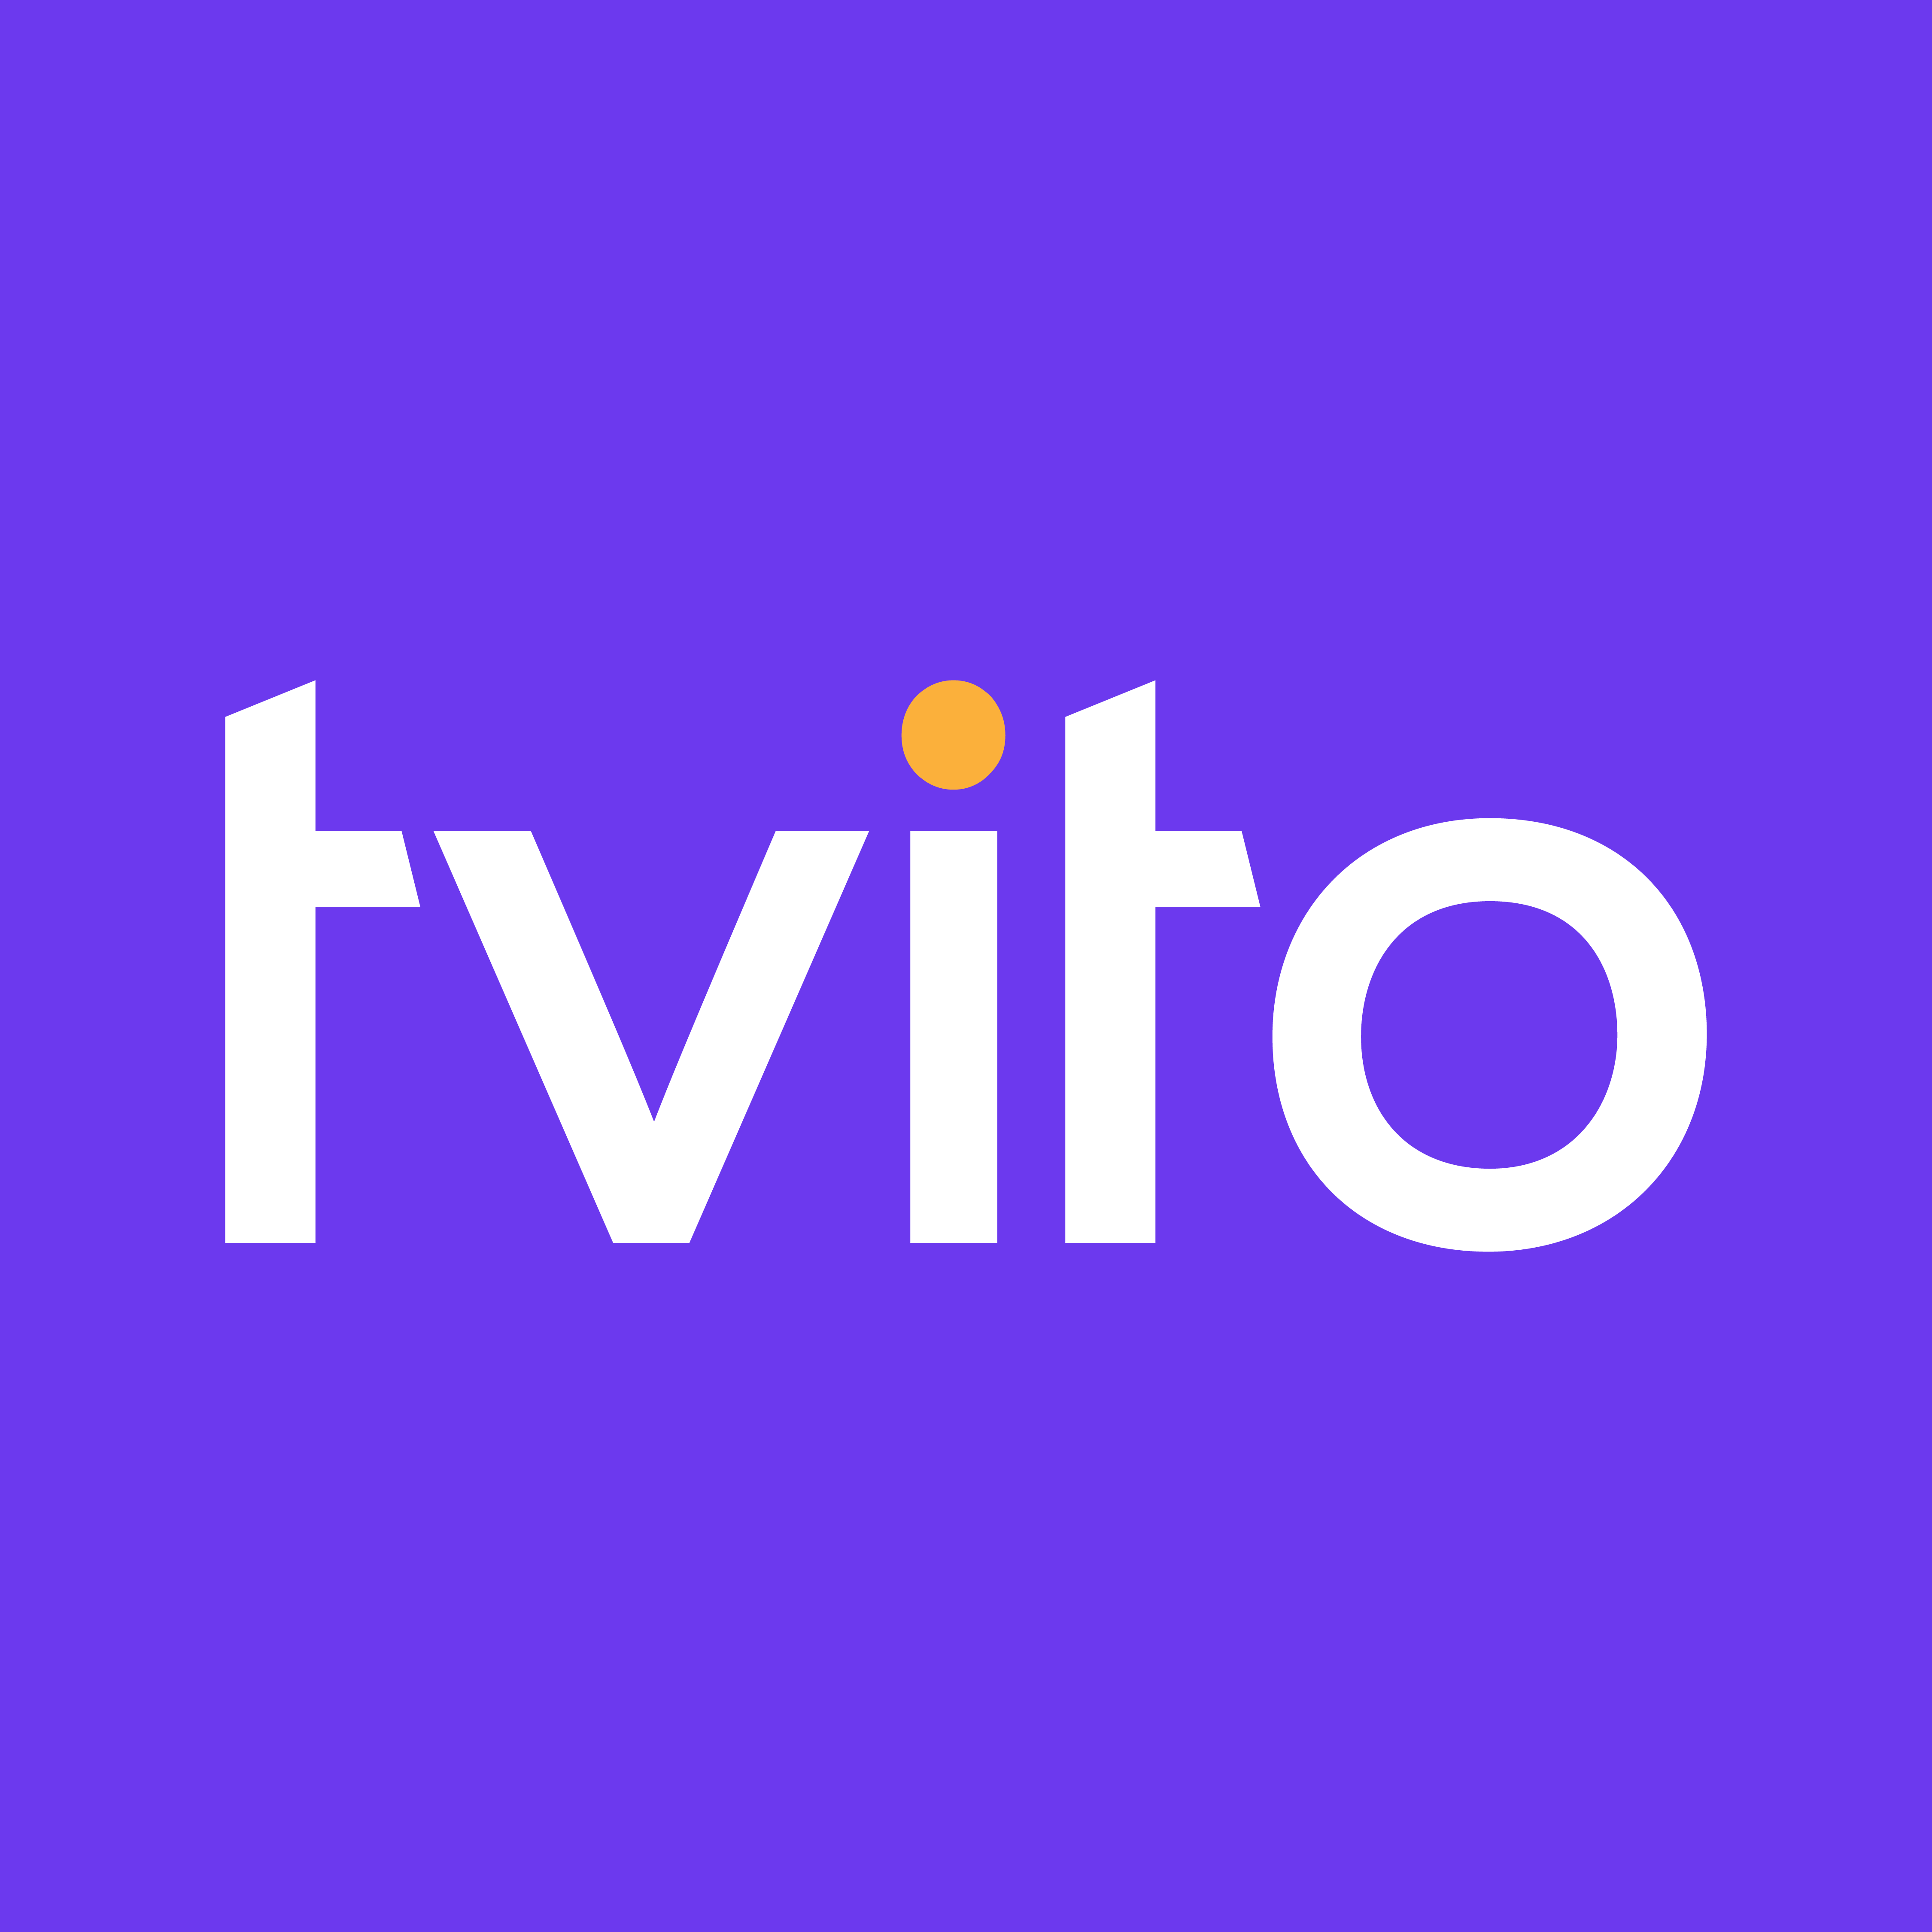 Petpooja launches Tvito, a restaurant marketing app to promote sustainable growth for restaurants